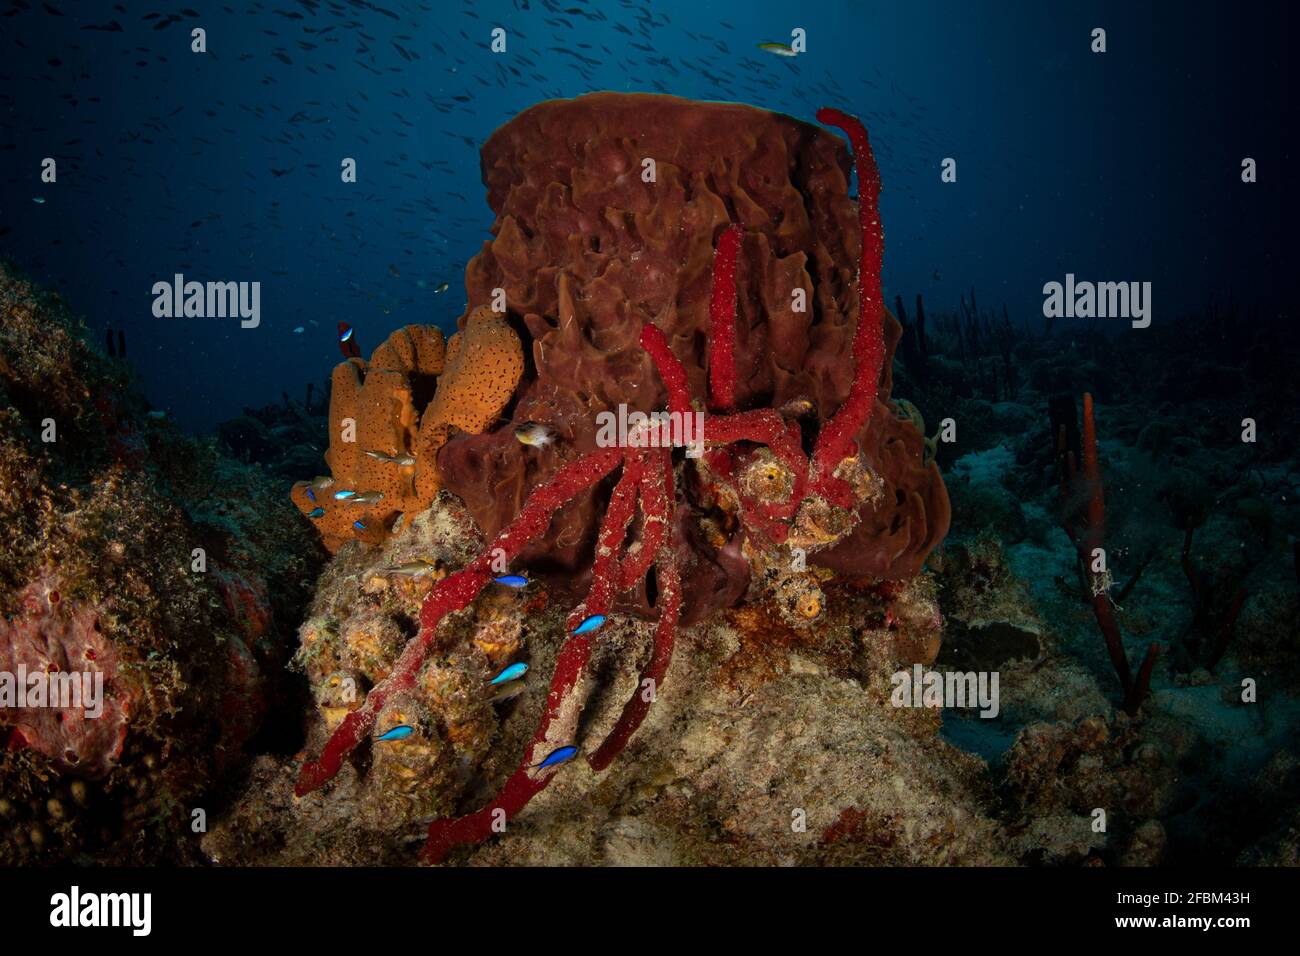 Tube sponges on the reef of the Caribbean island of Sint Maarten Stock Photo